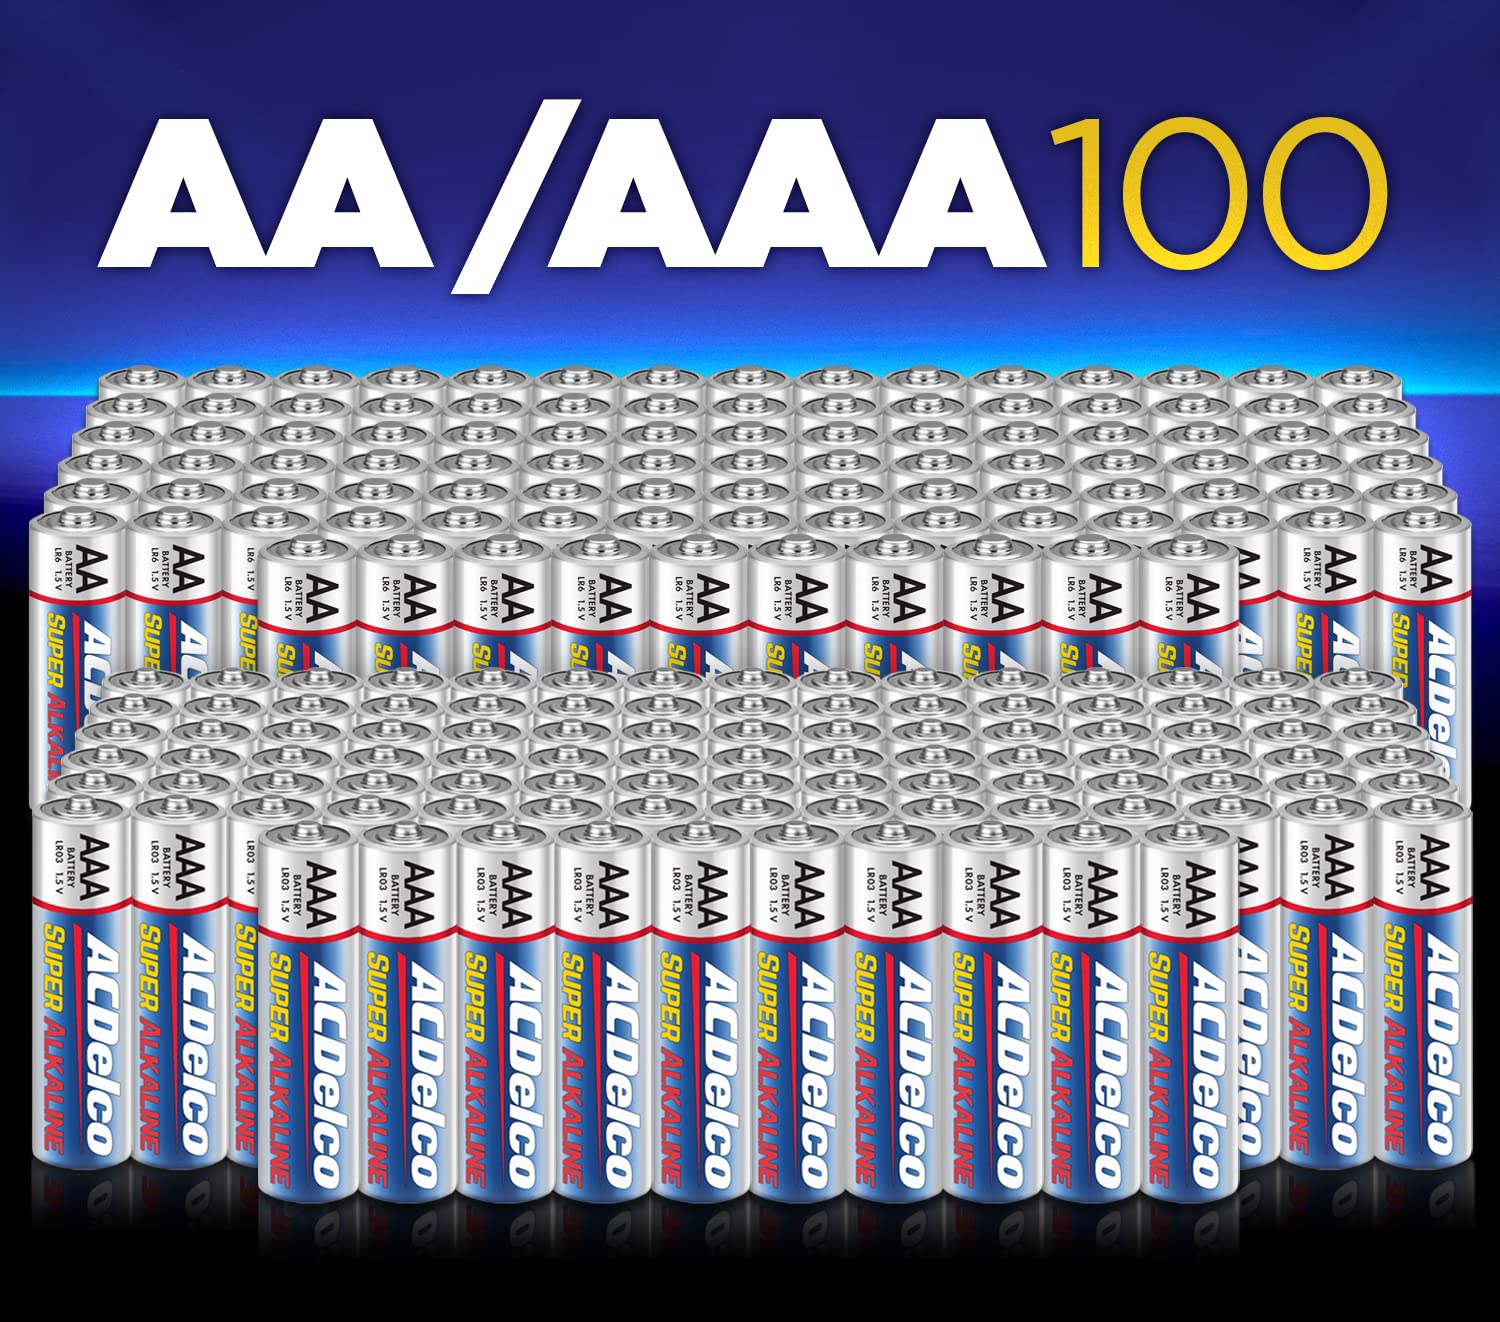 ACDelco AA and AAA 200-Count Combo Pack Super Alkaline Batteries, 100-Count Each, 10-Year Shelf Life, Reclosable Packaging